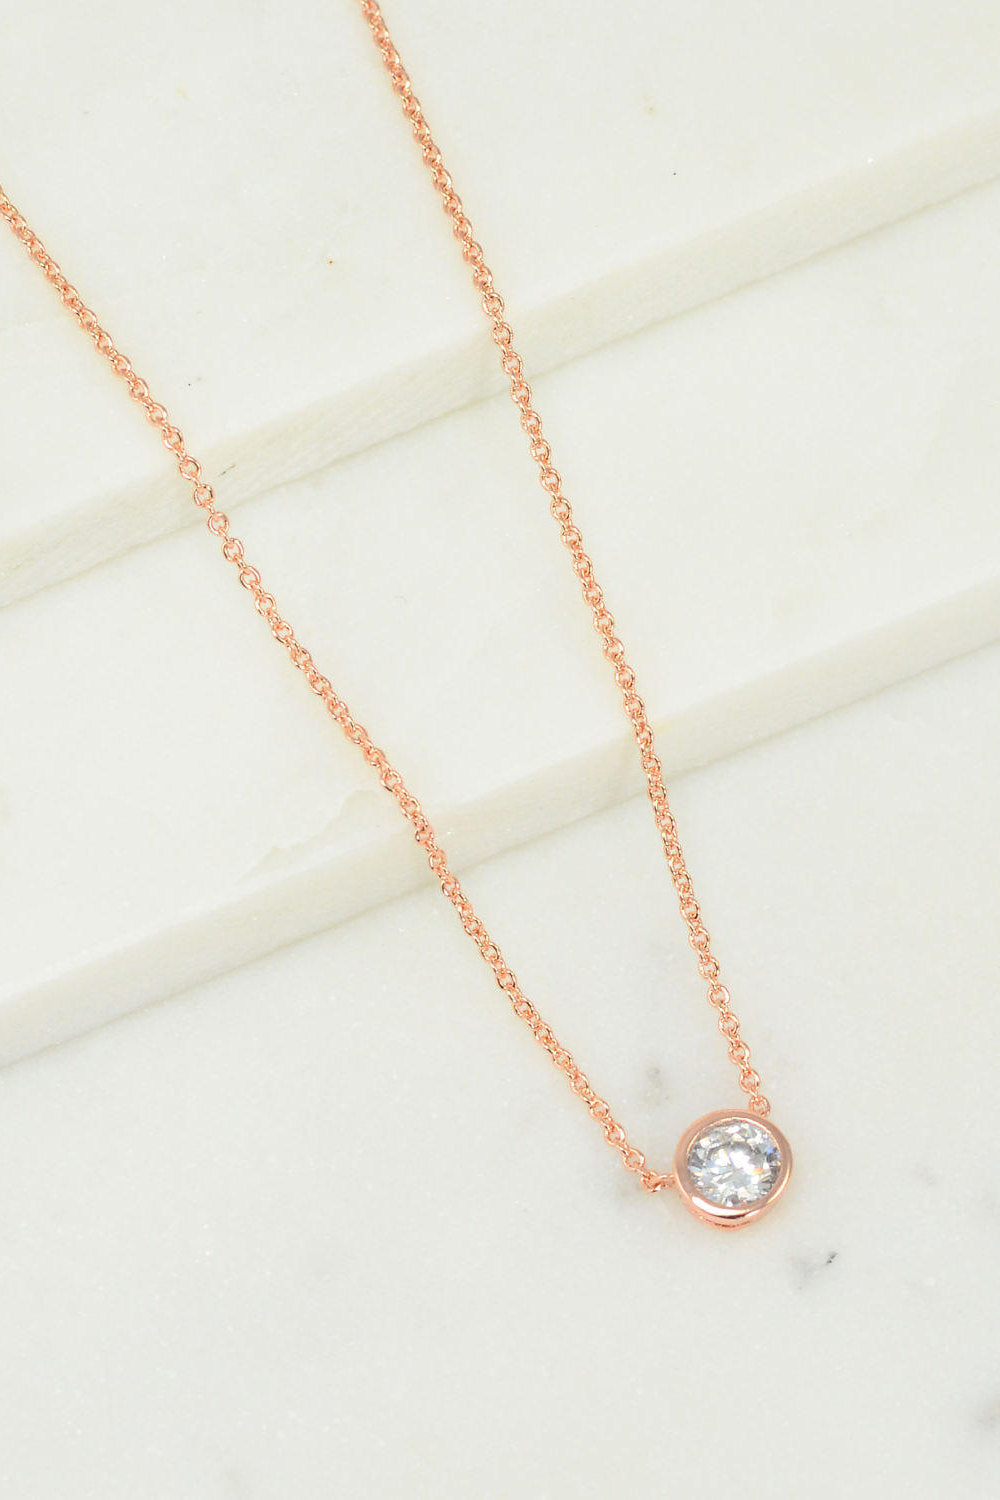 Solitaire Diamond Necklace - Dainty Solitaire - Delicate Solitaire - Floating Diamond - Rose gold - CZ Solitaire Necklace - Round diamond